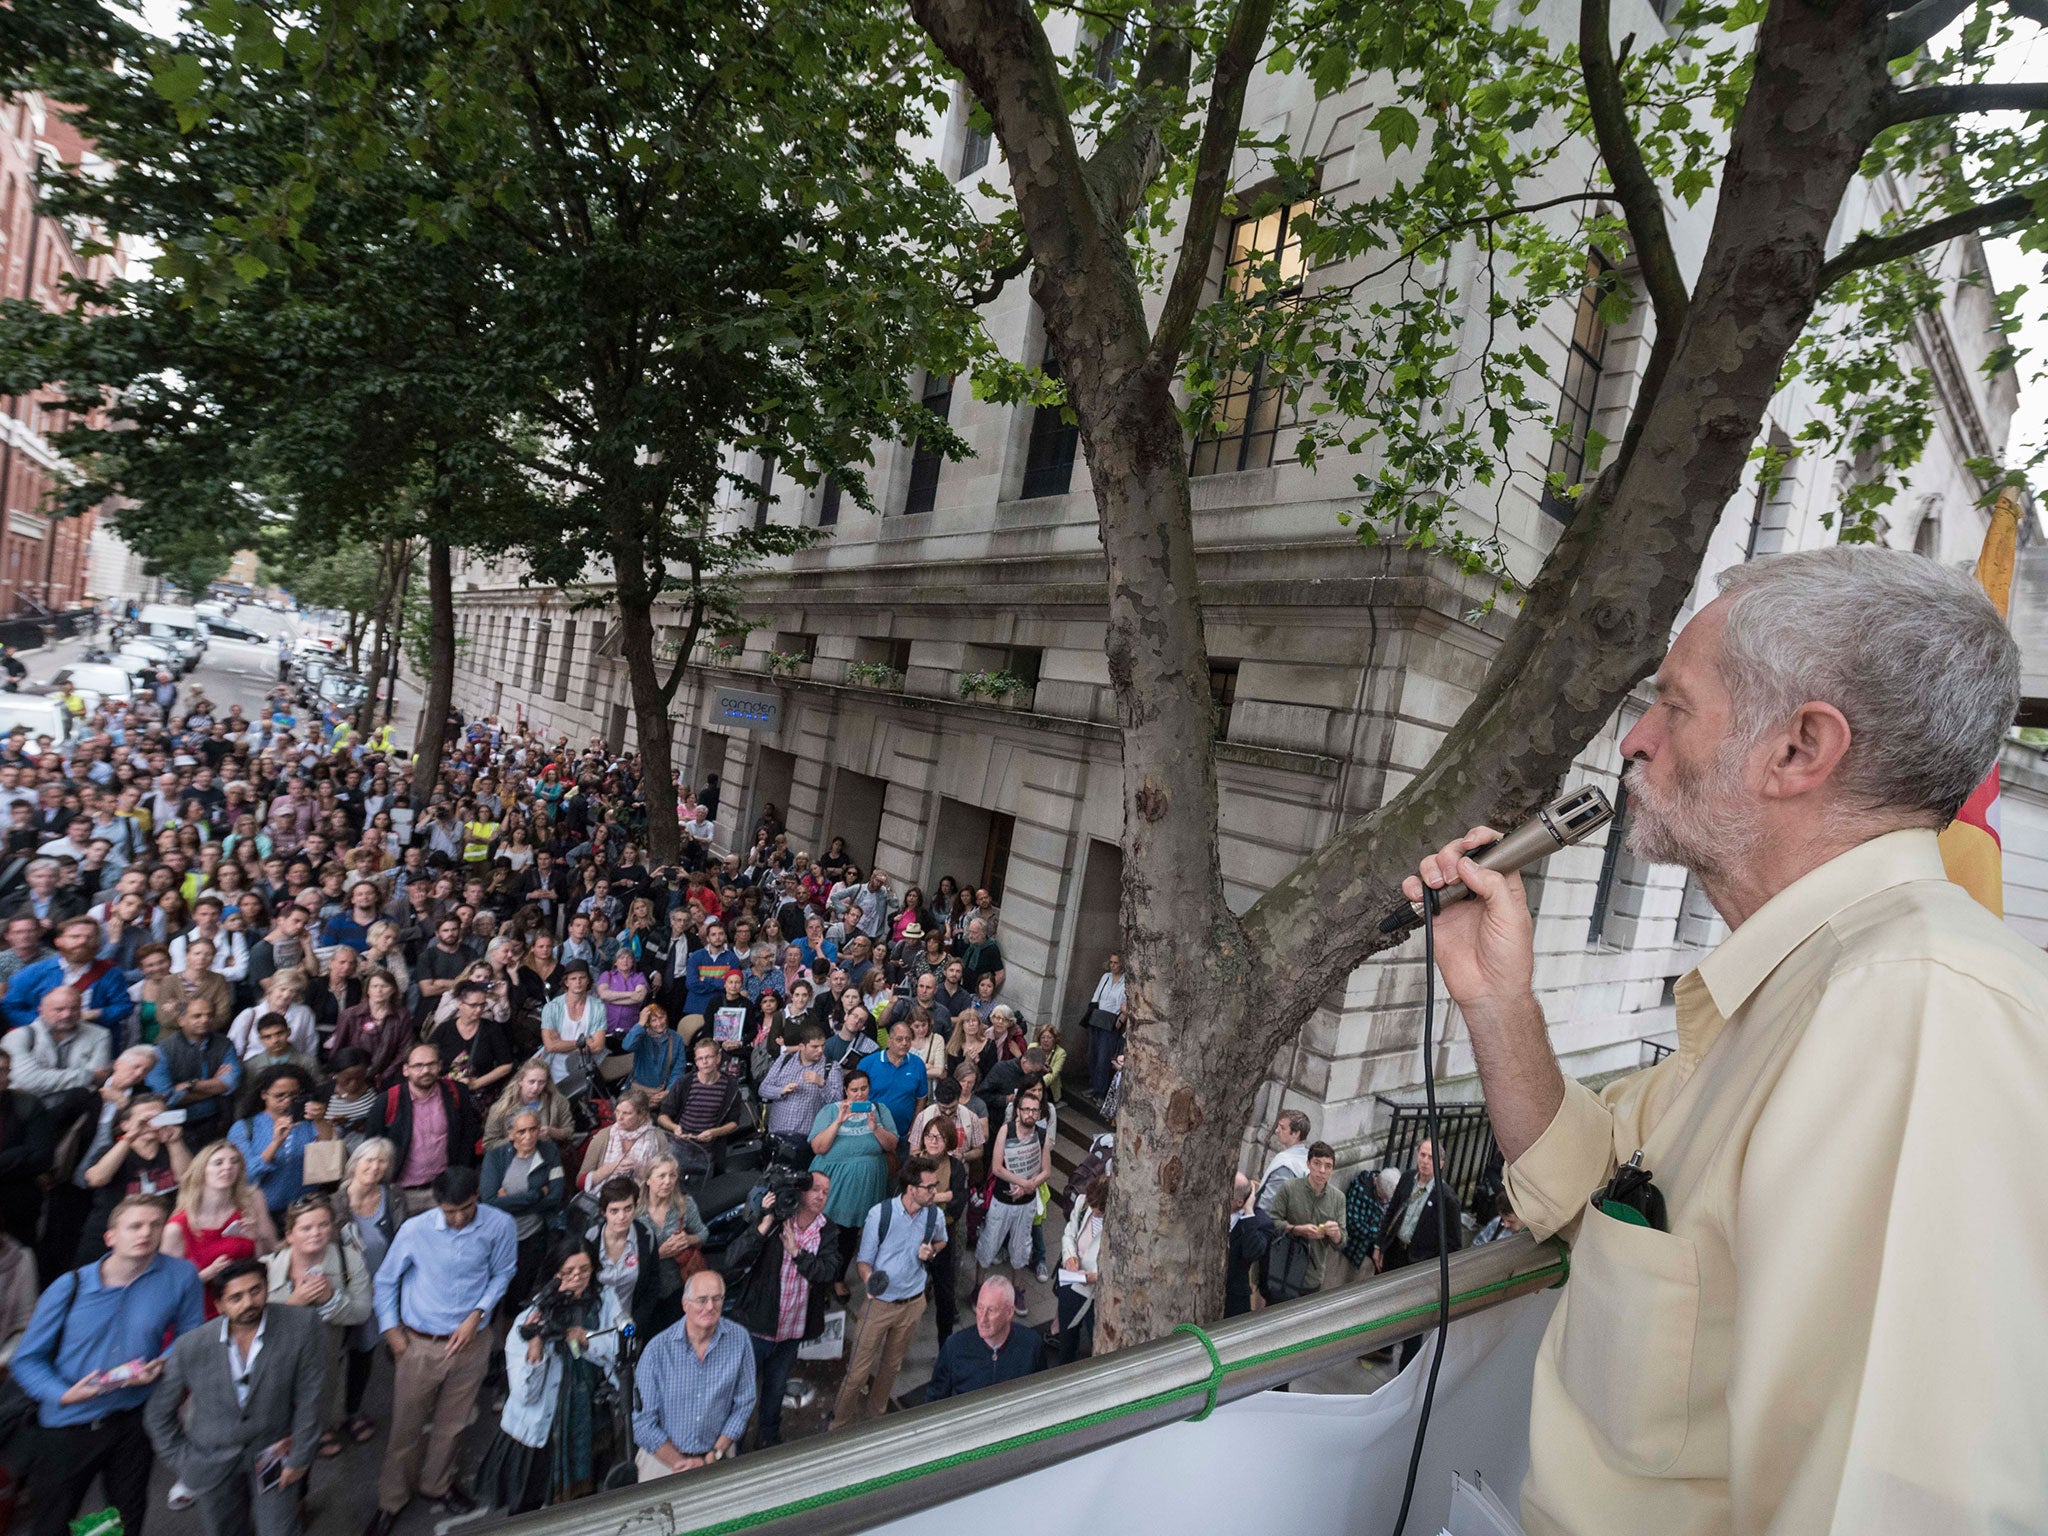 Jeremy Corbyn addresses supporters from the top of a fire engine after one of his rallies spilled into the street (Lee Thomas)